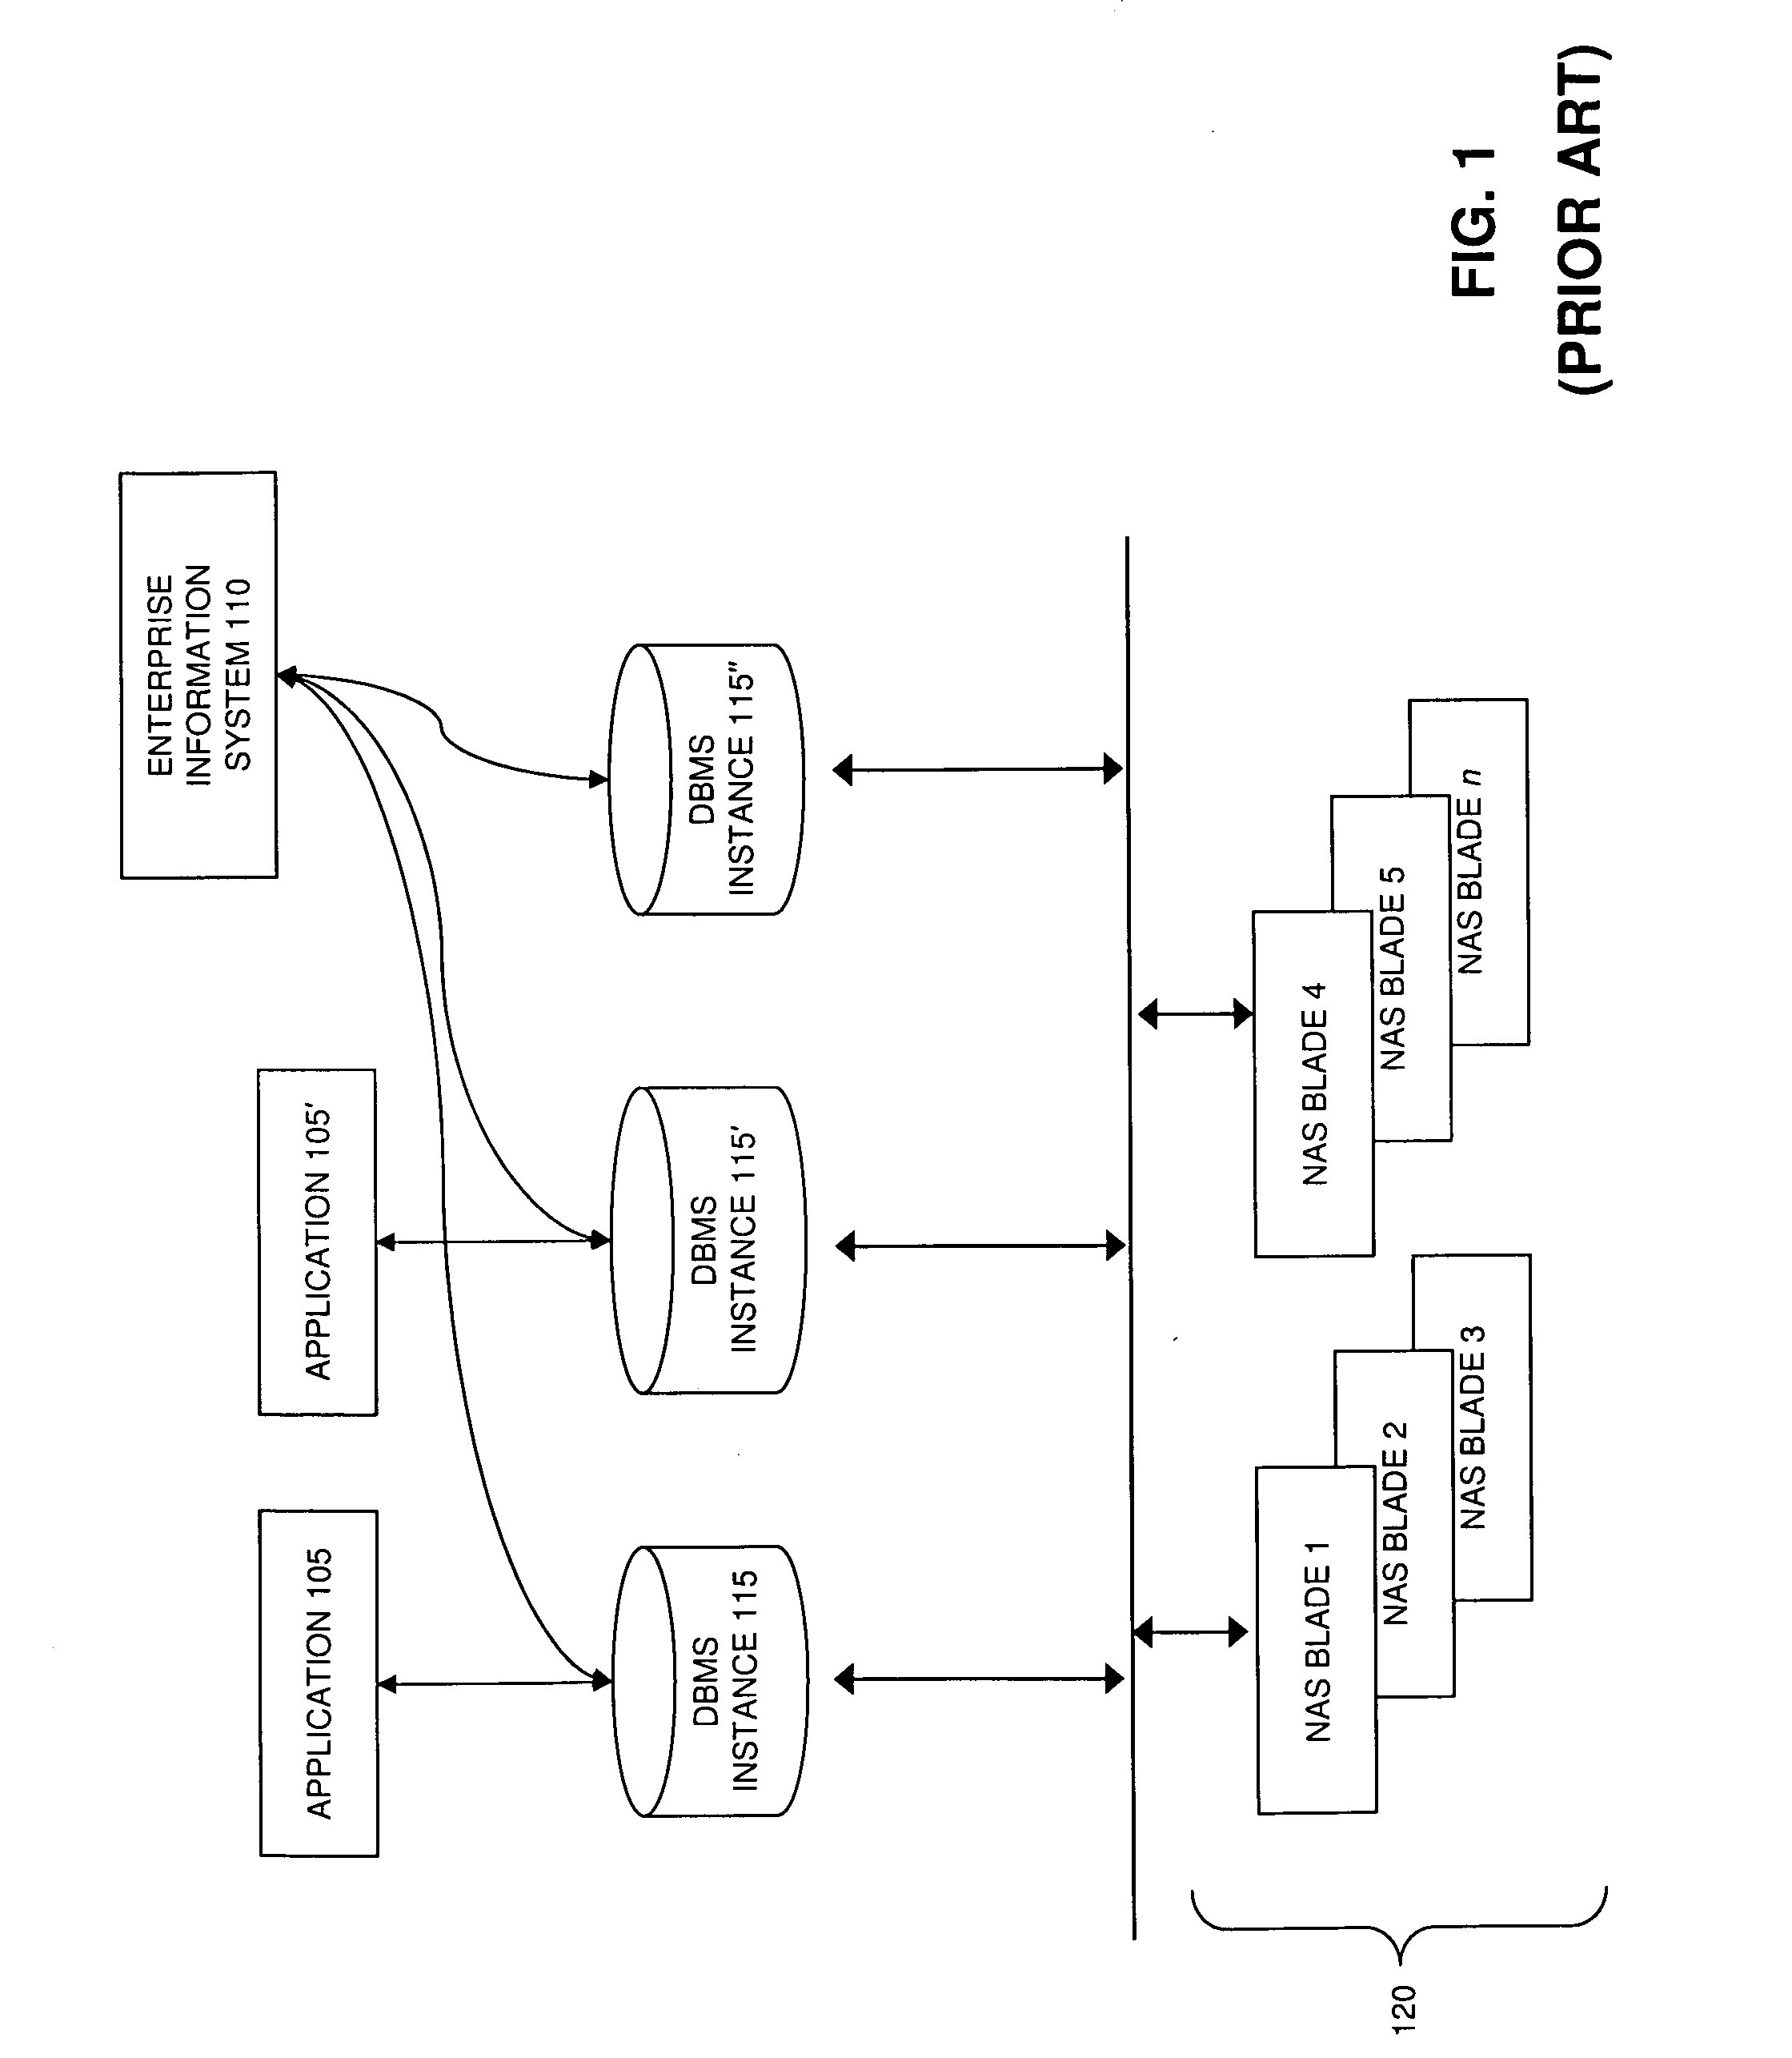 Network-attached storage devices